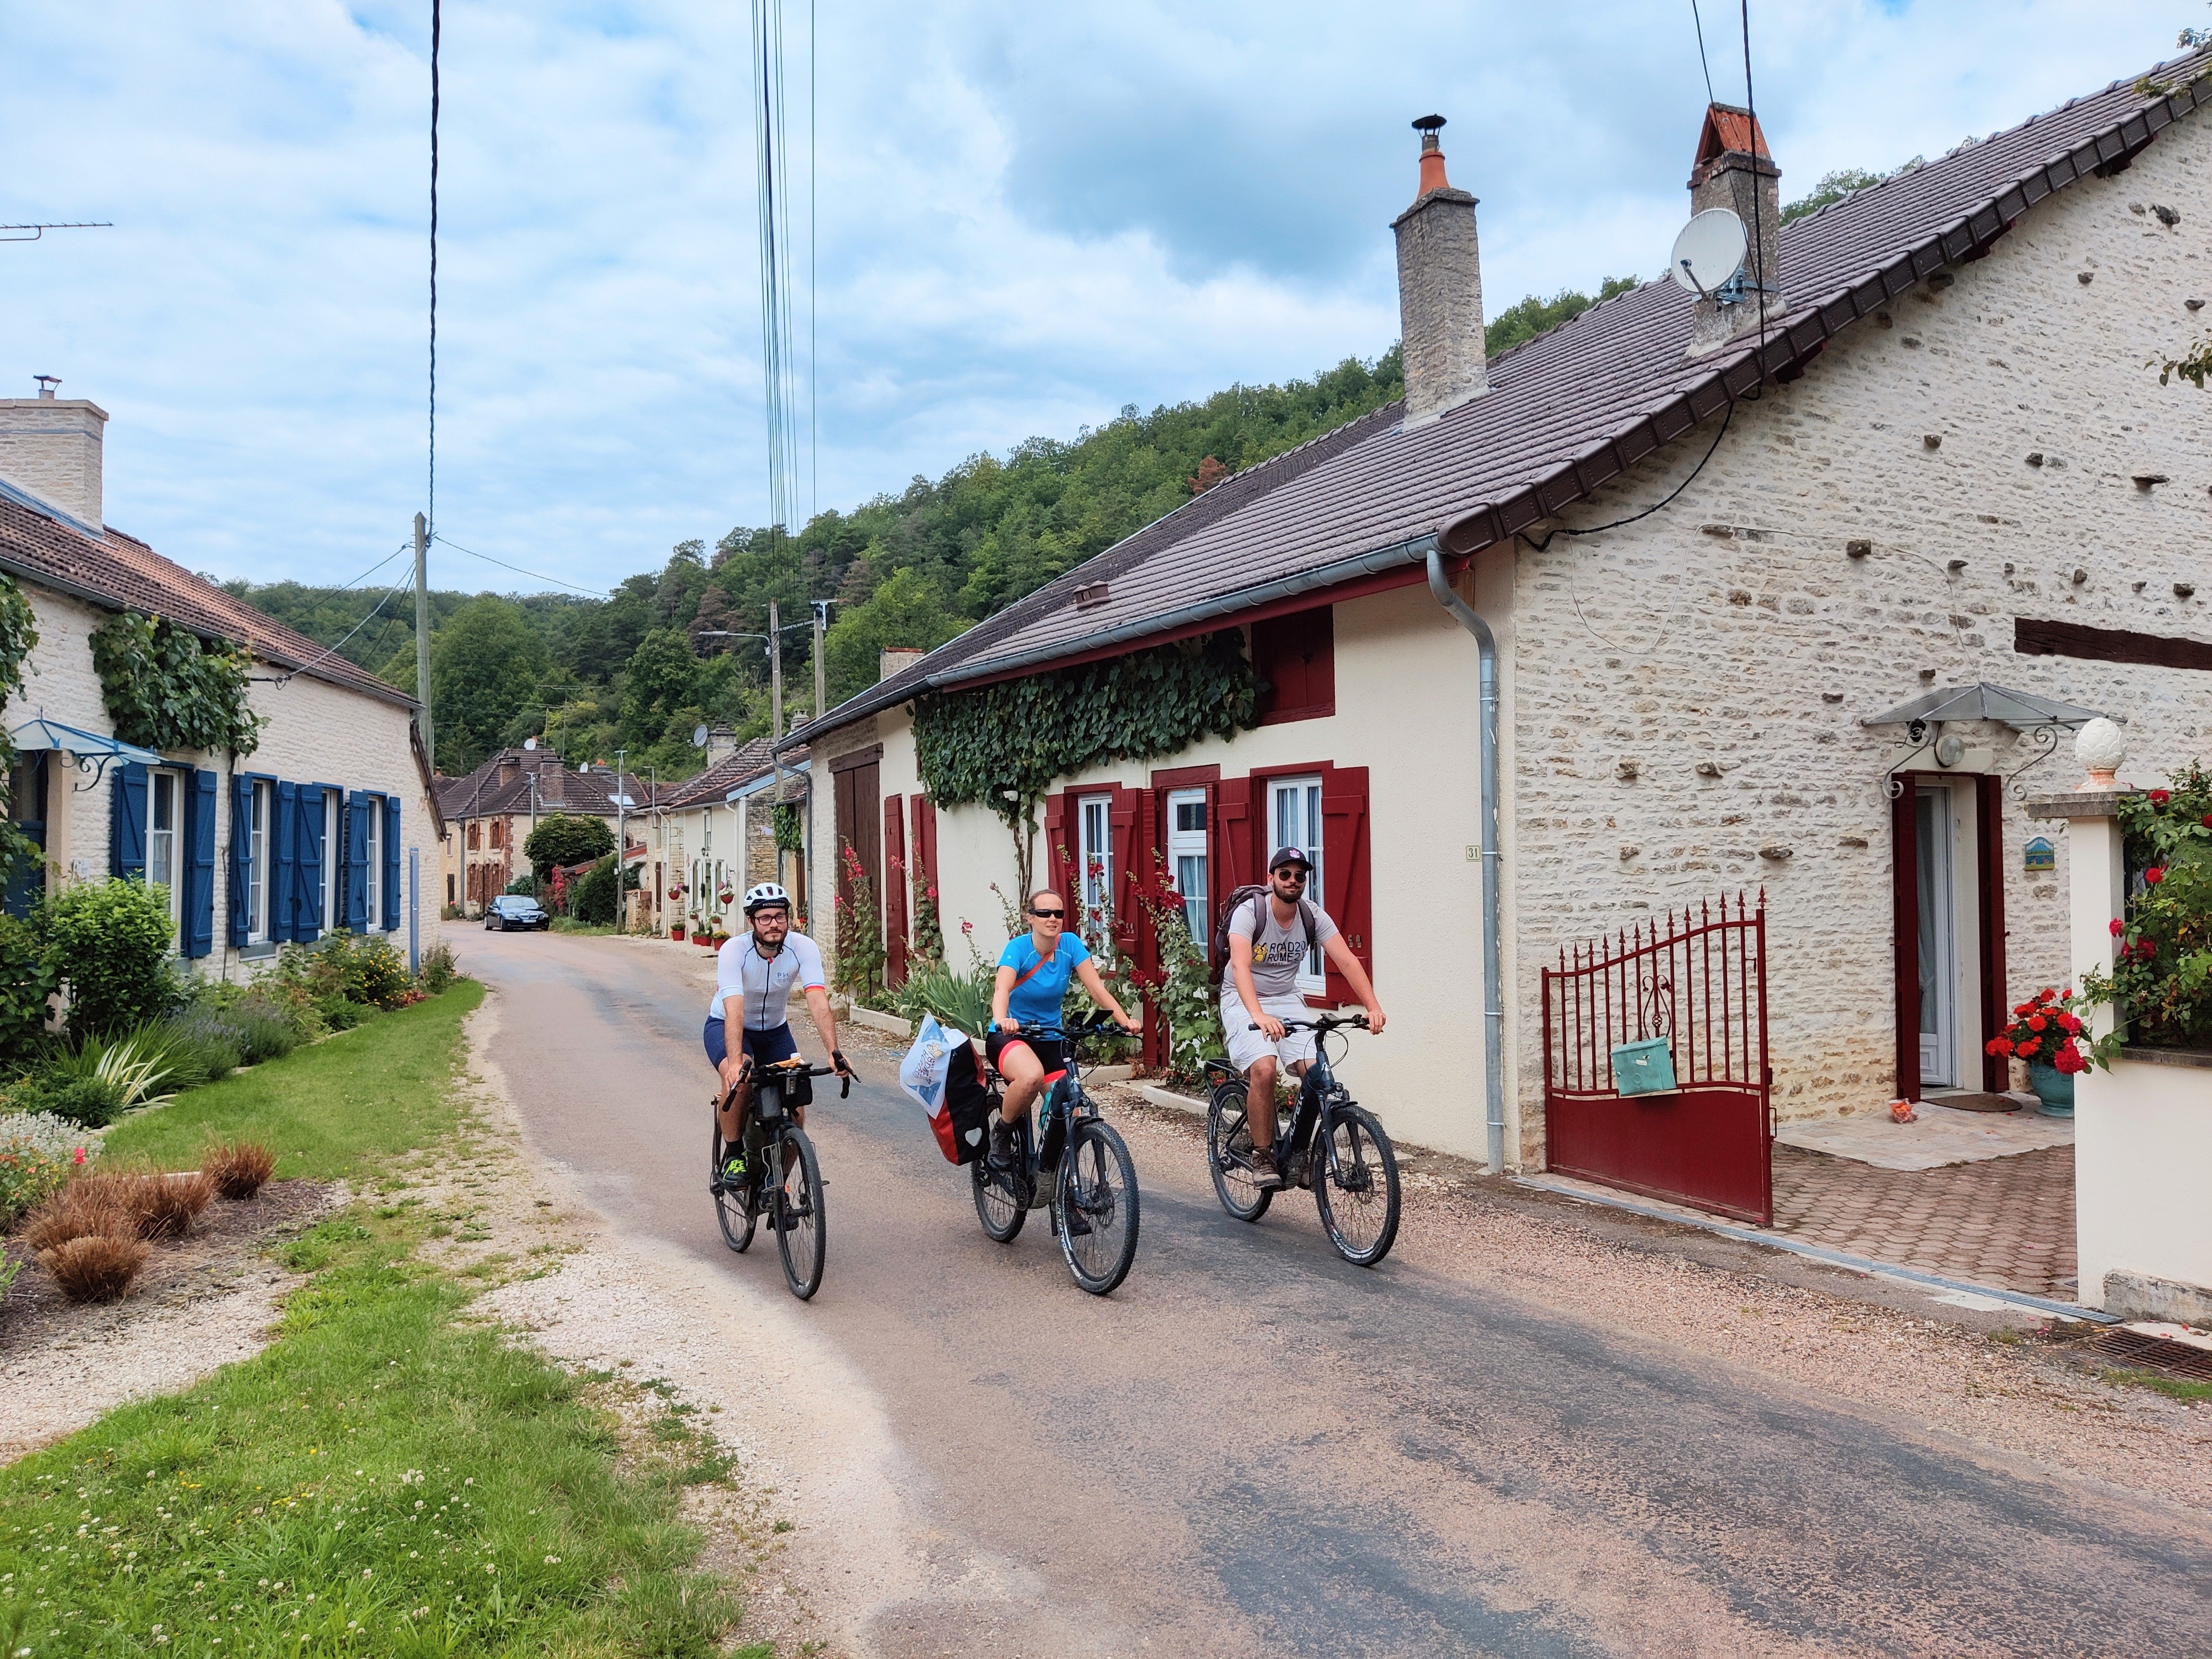 Three cyclists in a typical Alsace town along the Via Francigena pilgrimage route